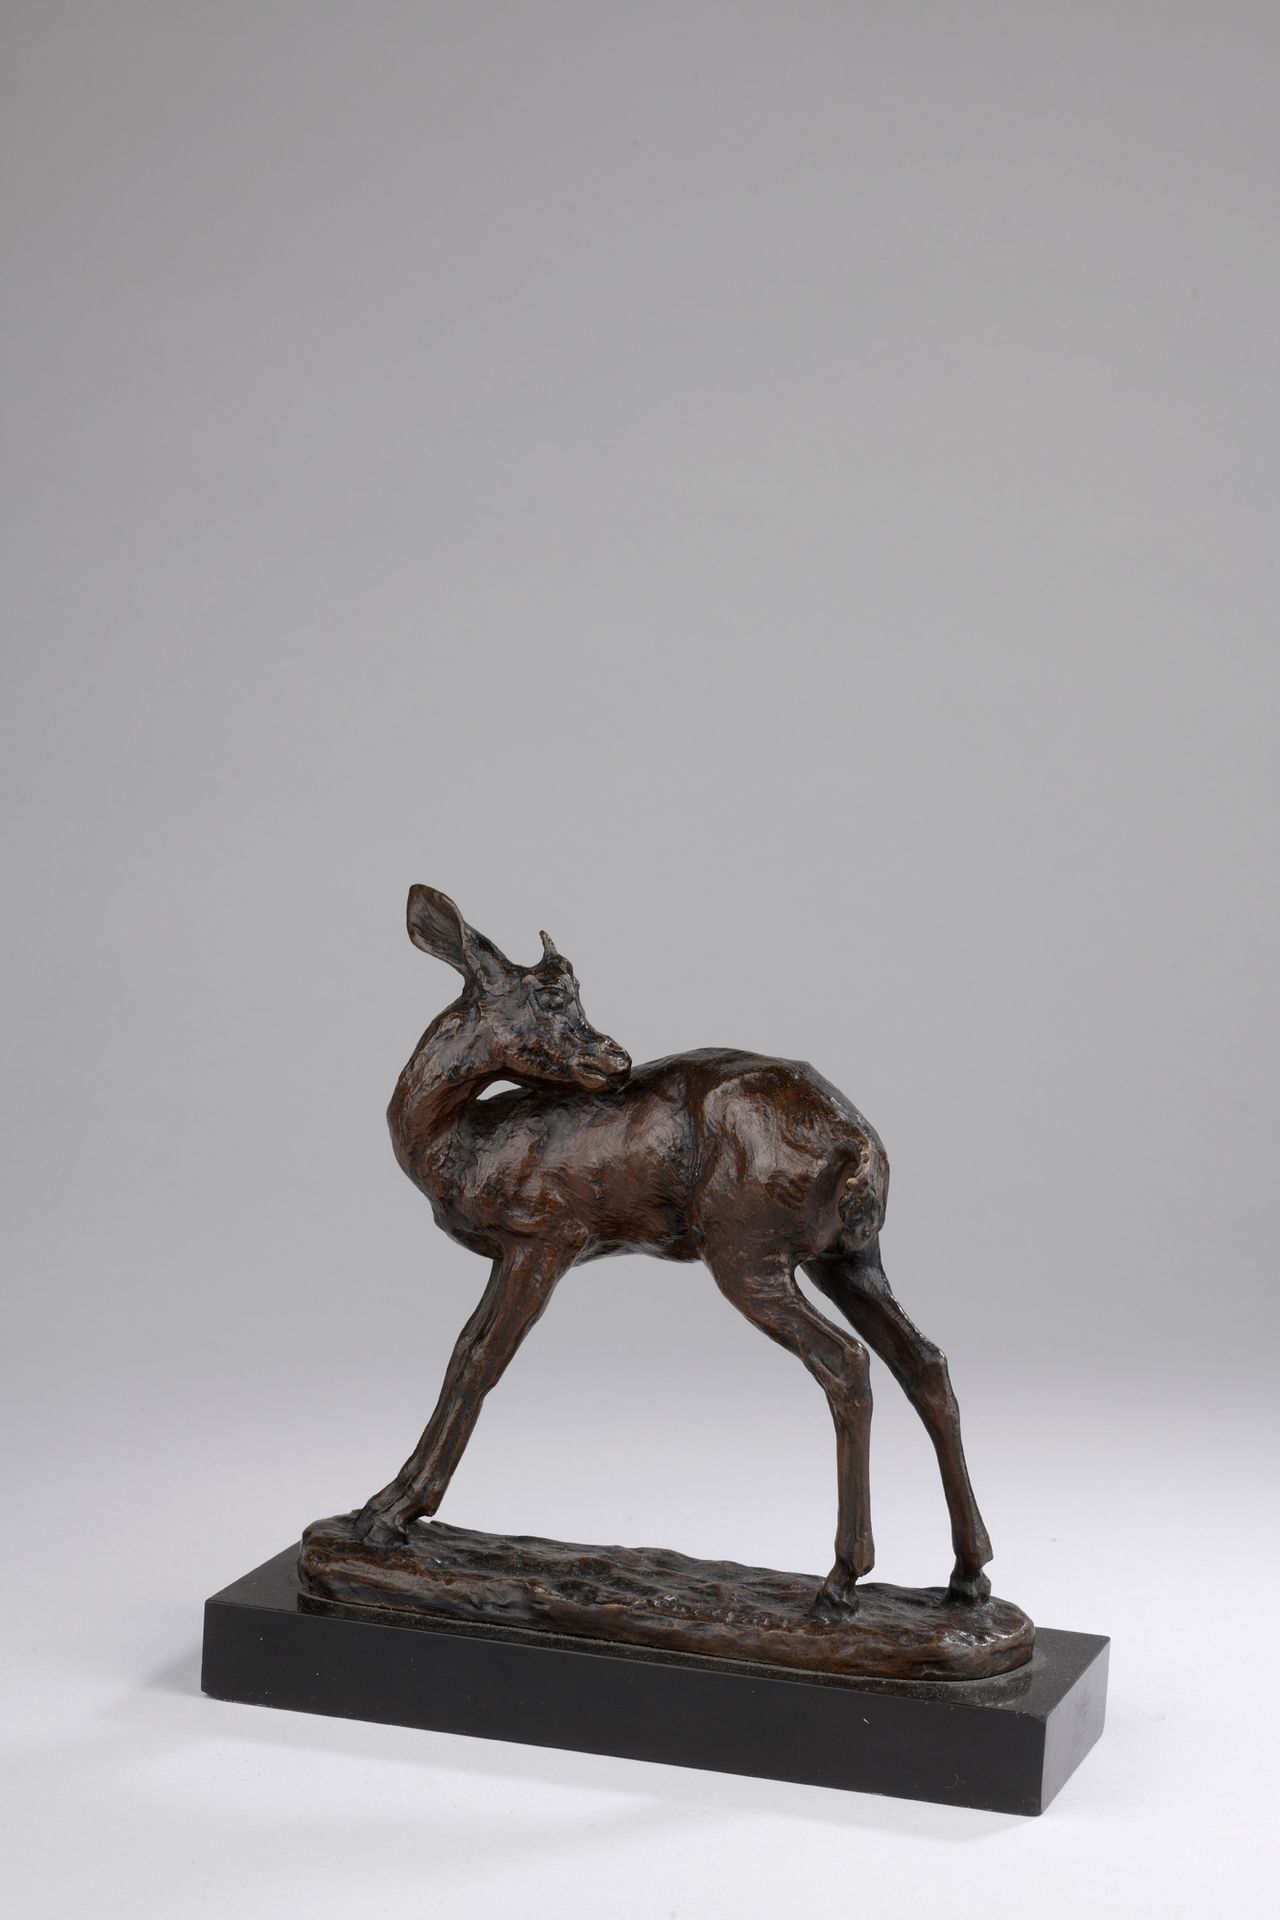 Null René Paris (1881-1970)

Fawn

Bronze with light brown patina shaded with re&hellip;